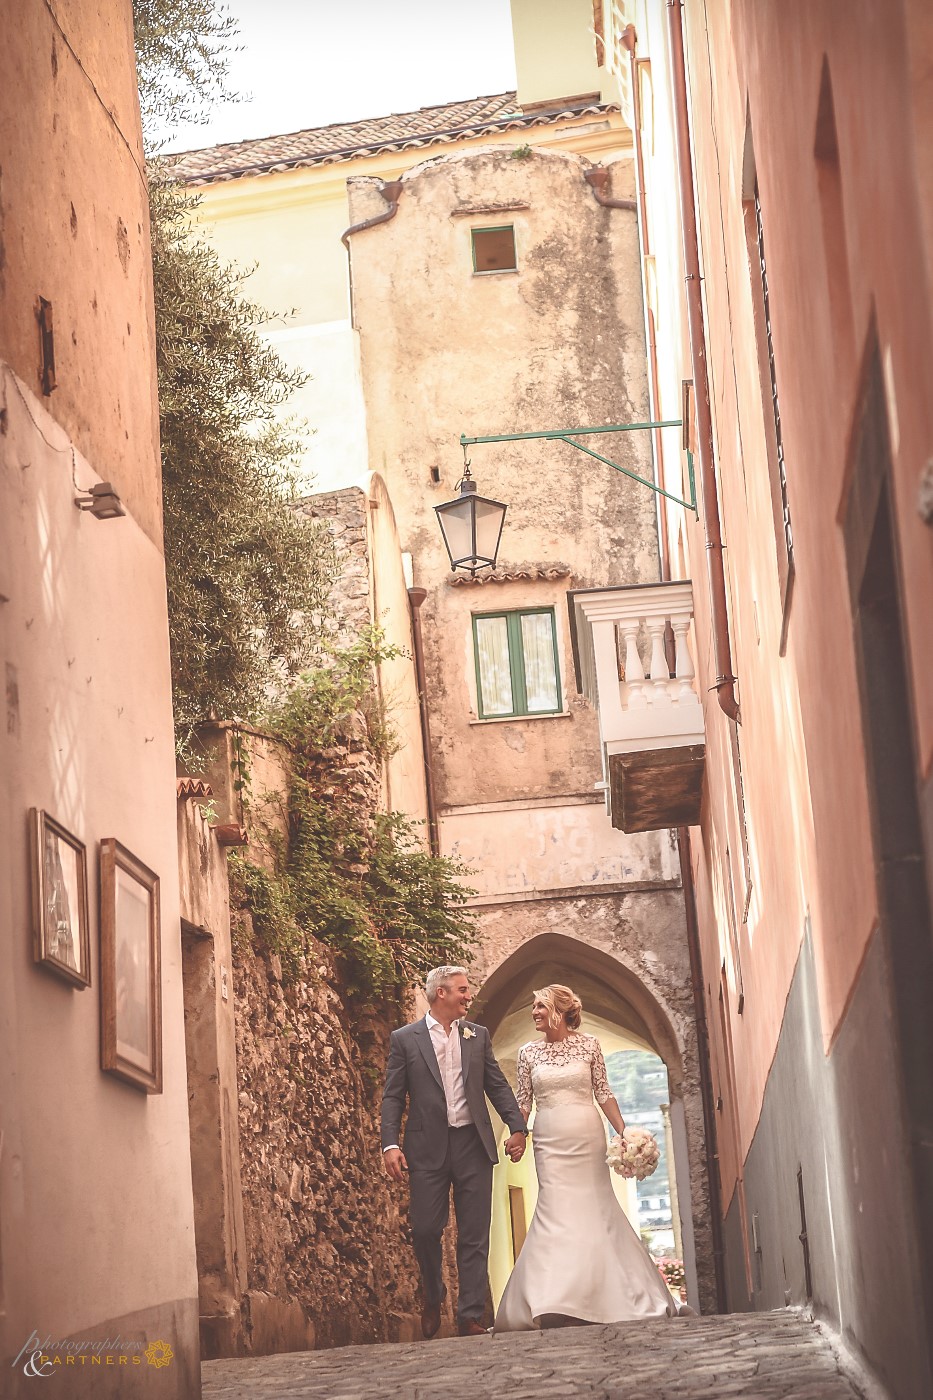 A walk in the historic alleys of Ravello